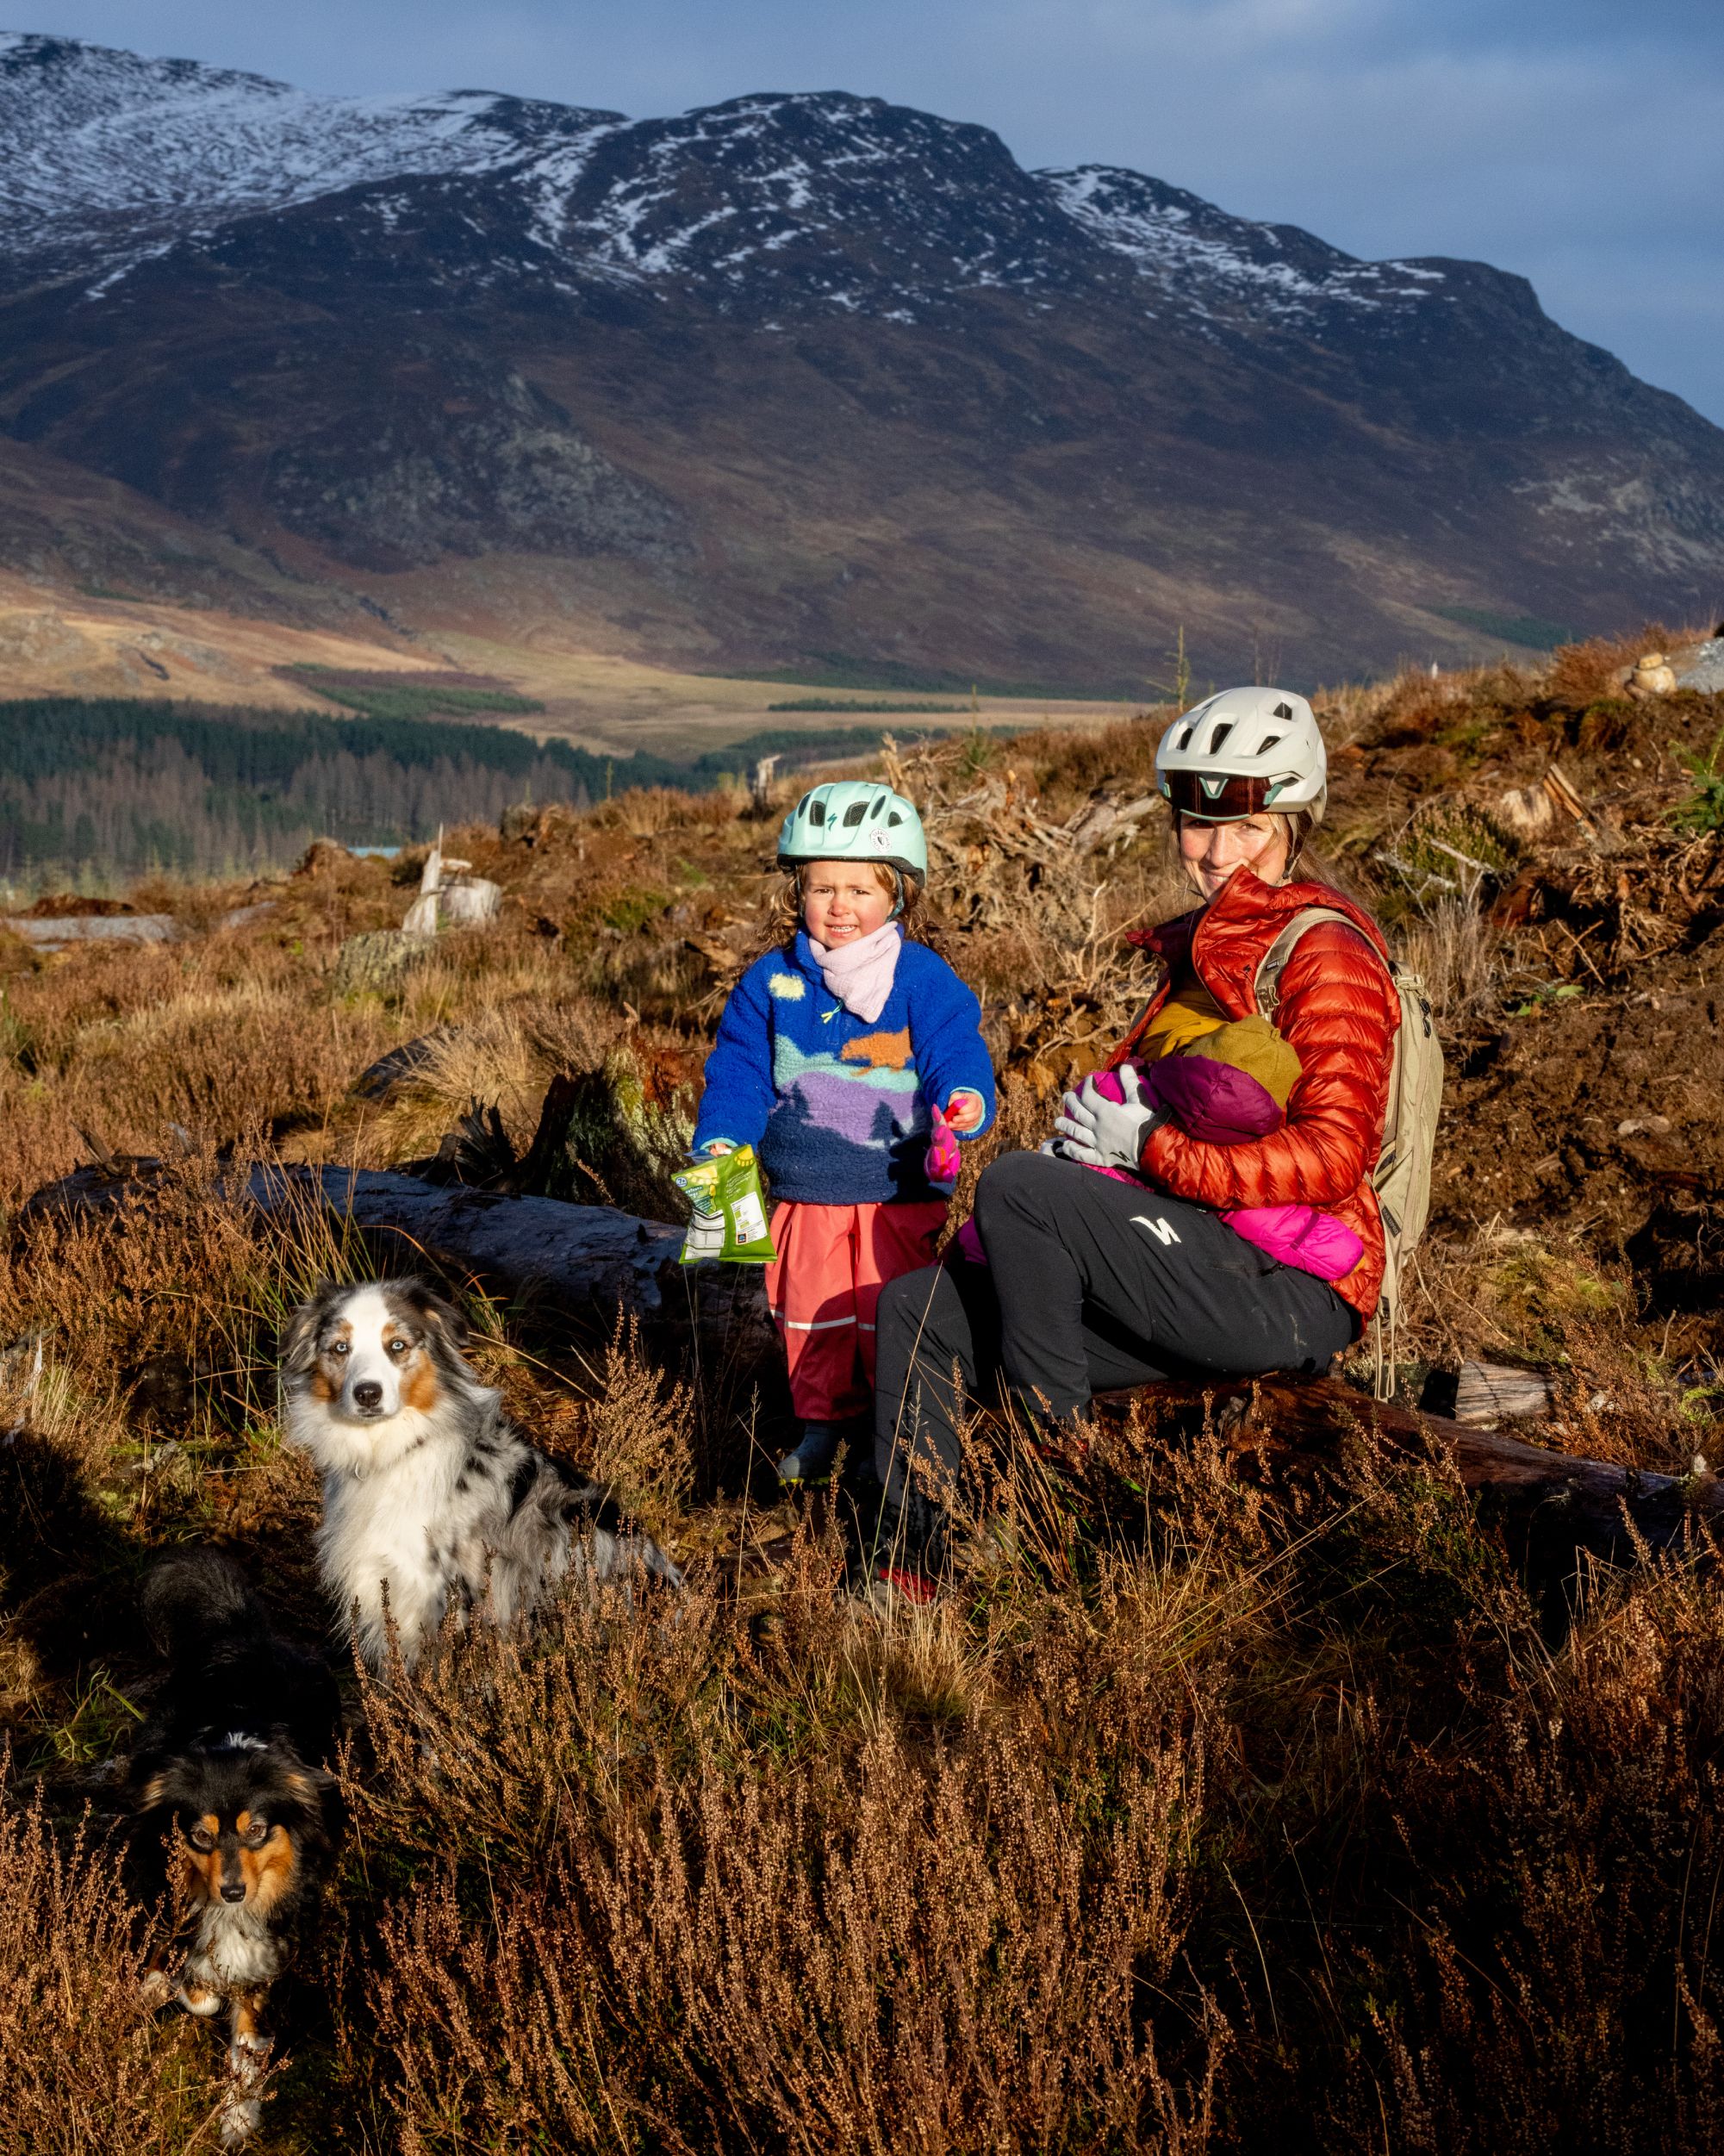 A woman, two children and a dog sitting on a log in a hilly environment.